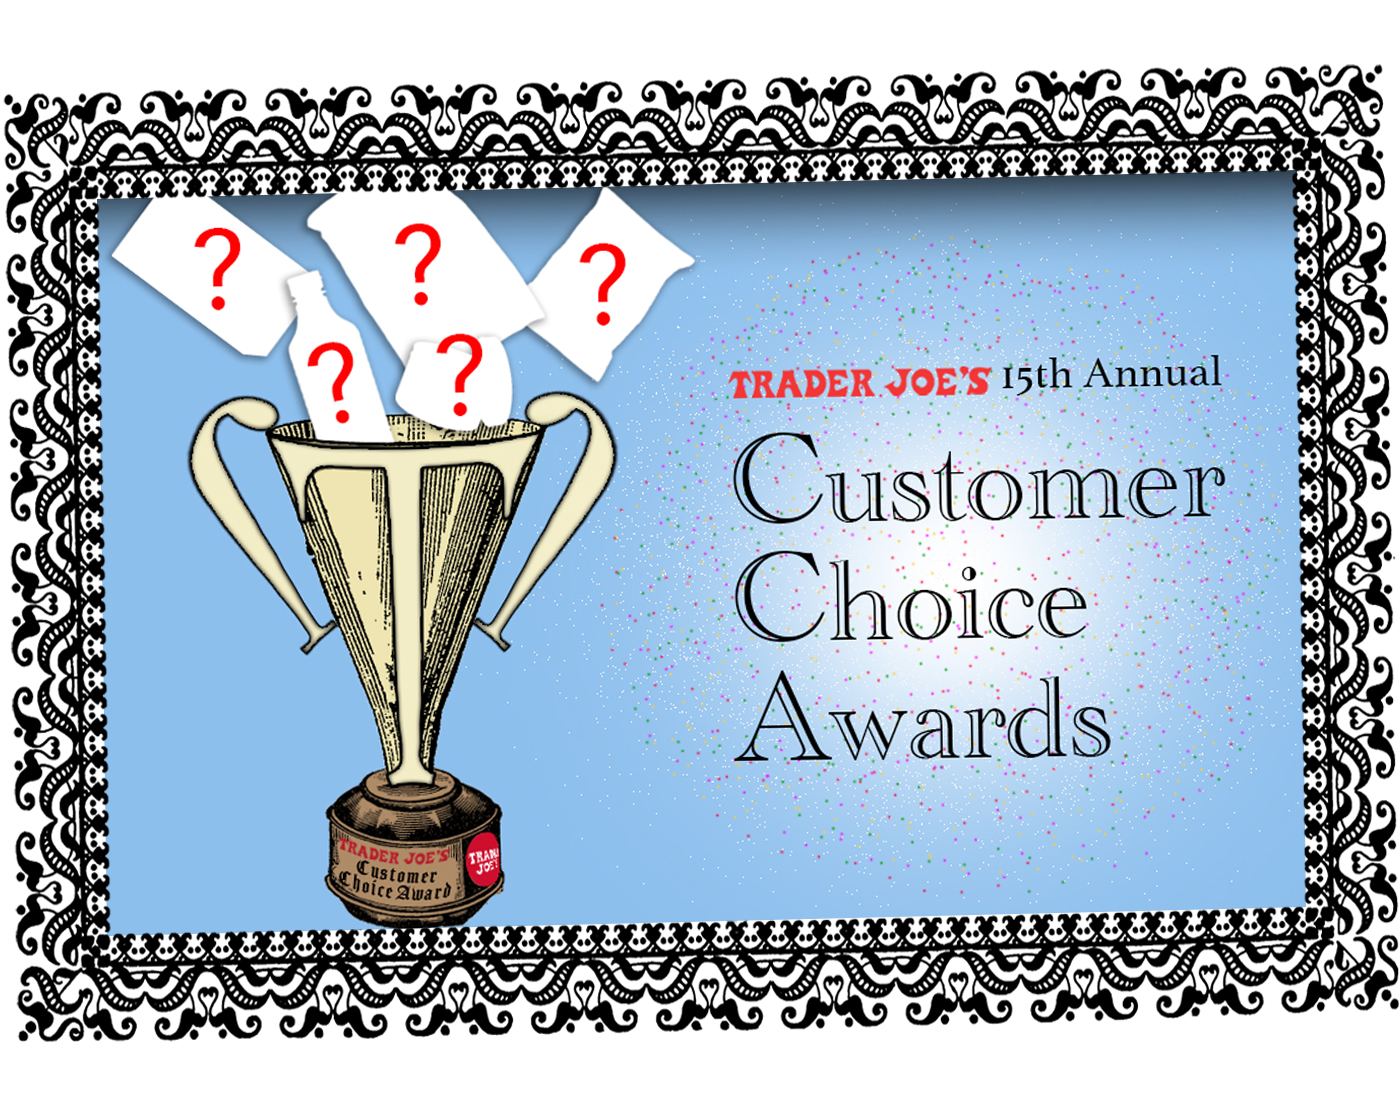 https://www.traderjoes.com/content/dam/trjo/editorial-main-images/15th-customer-choice-awards/15th-CCA-main-image-frame.png/jcr:content/renditions/cq5dam.web.1280.1280